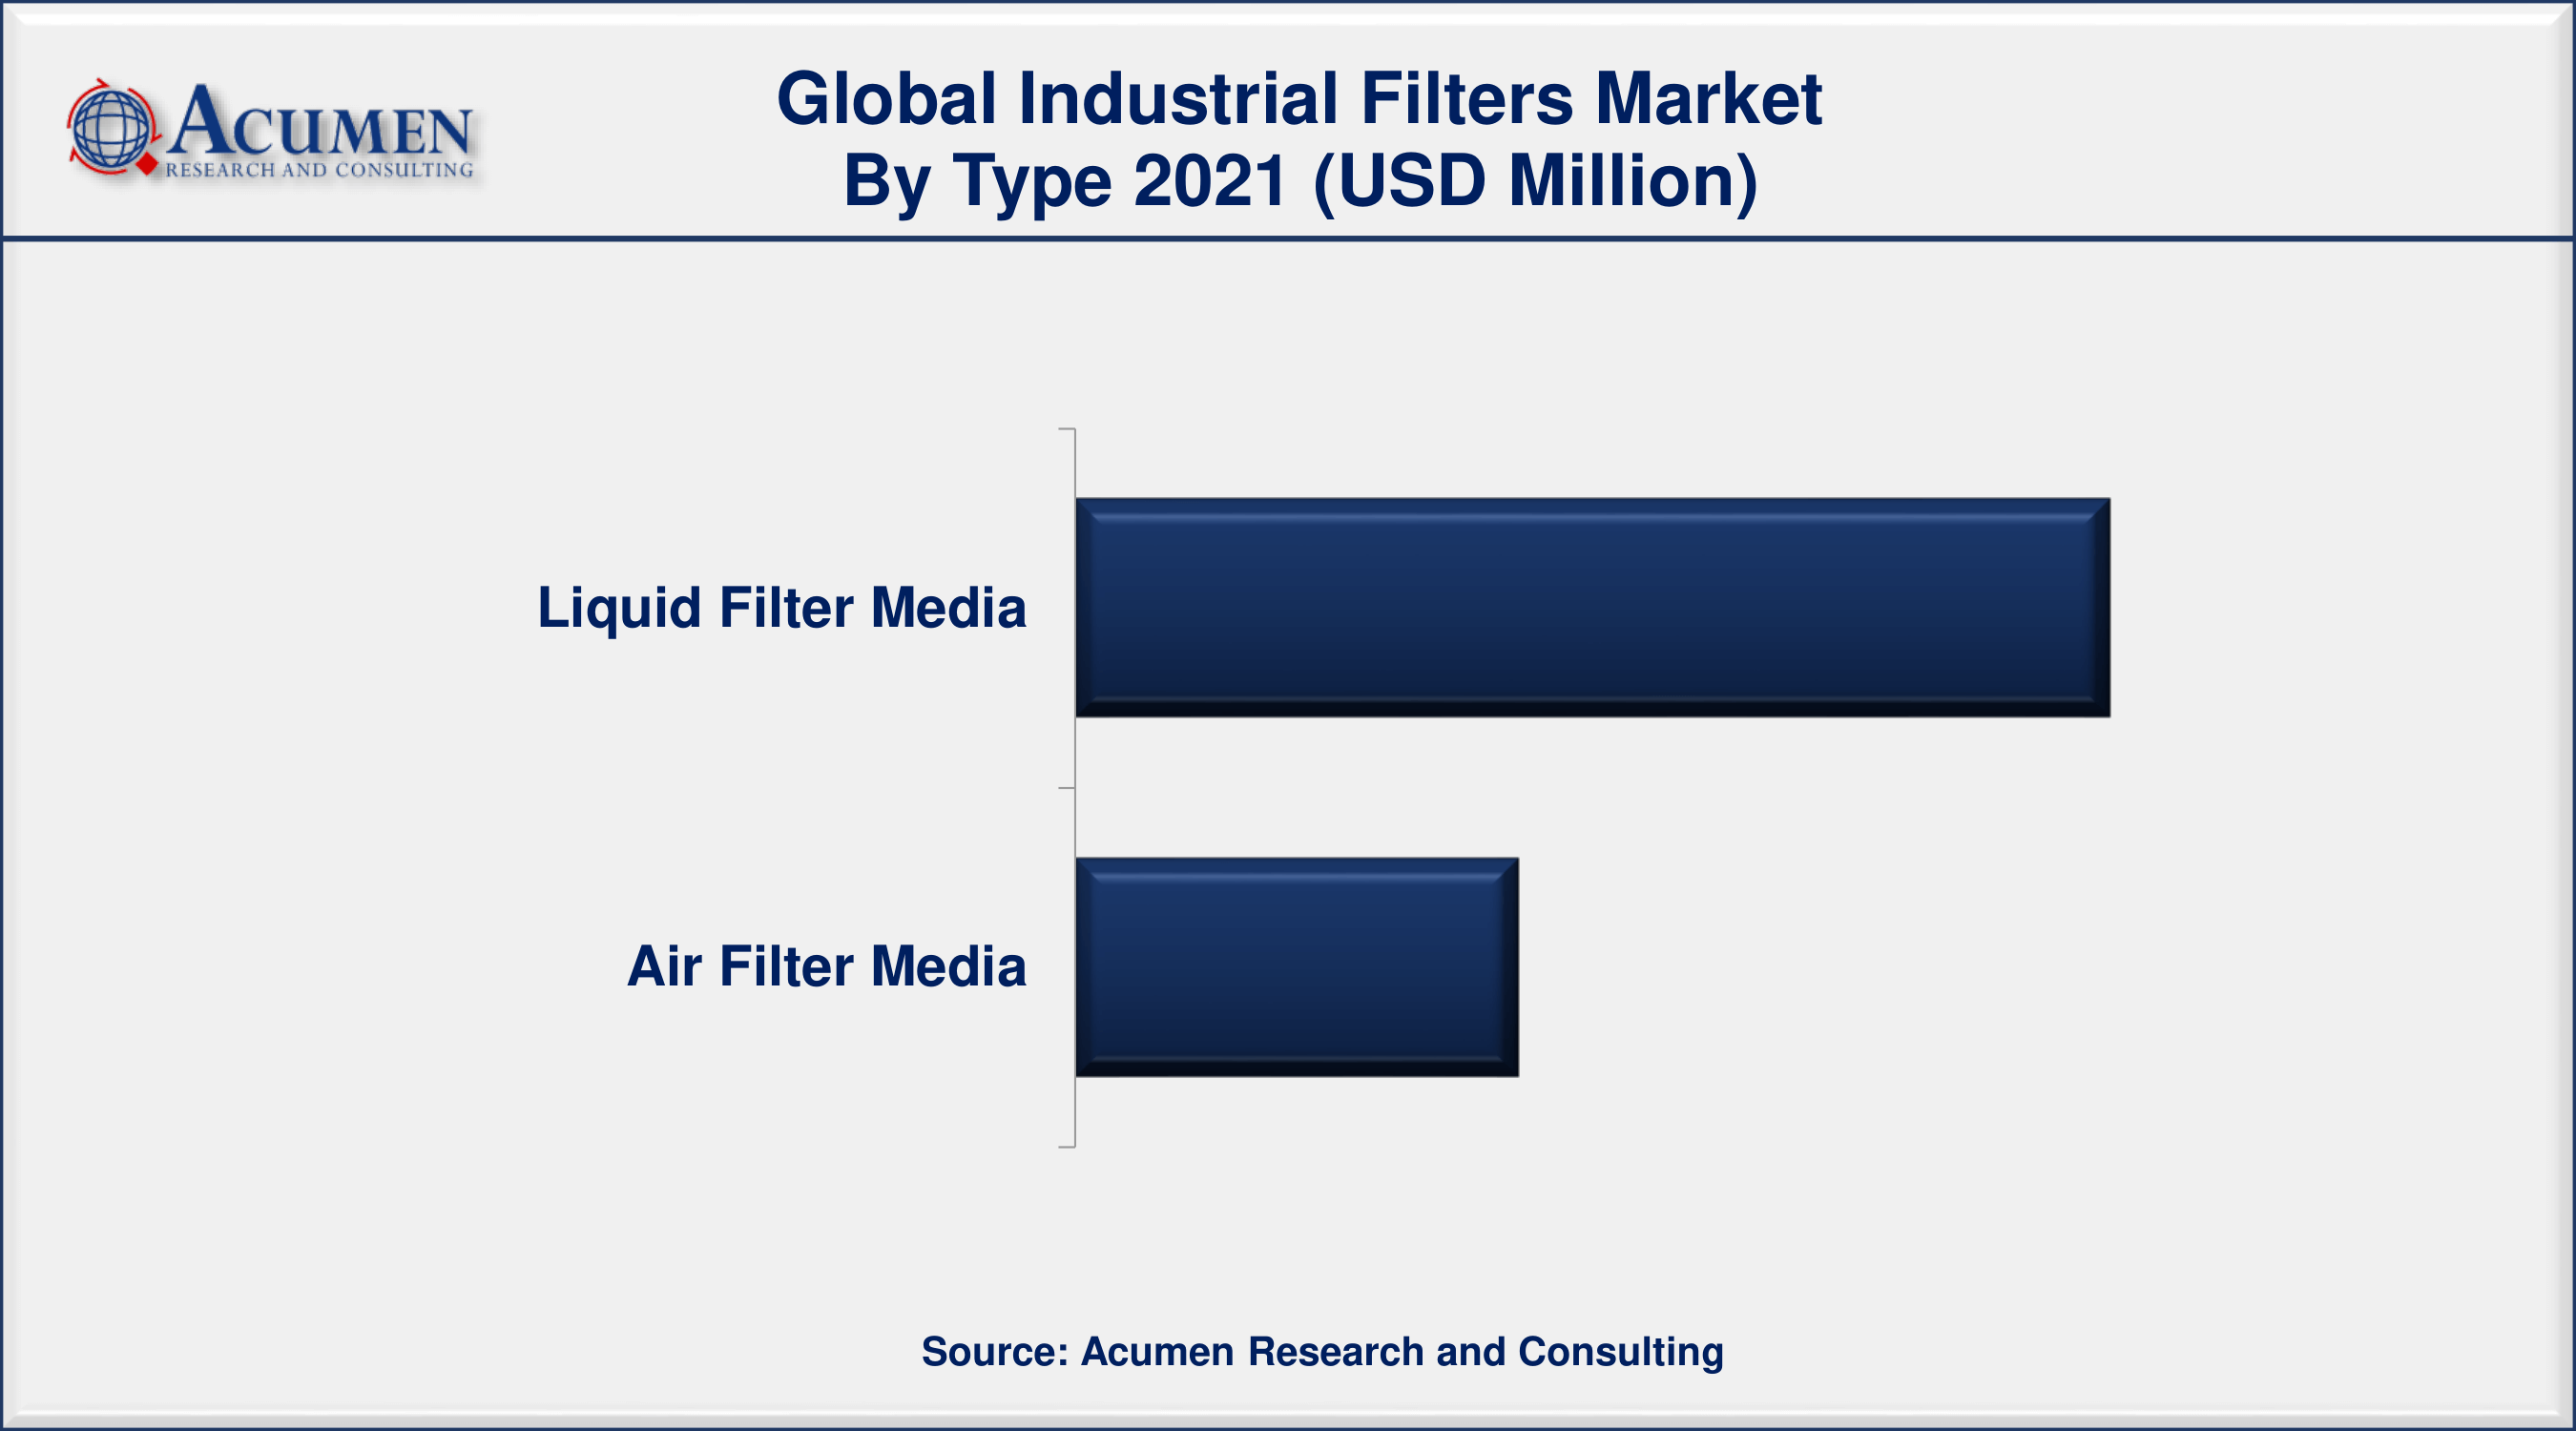 Asia-Pacific industrial filters market accounting for around 40% of the total market share in 2021